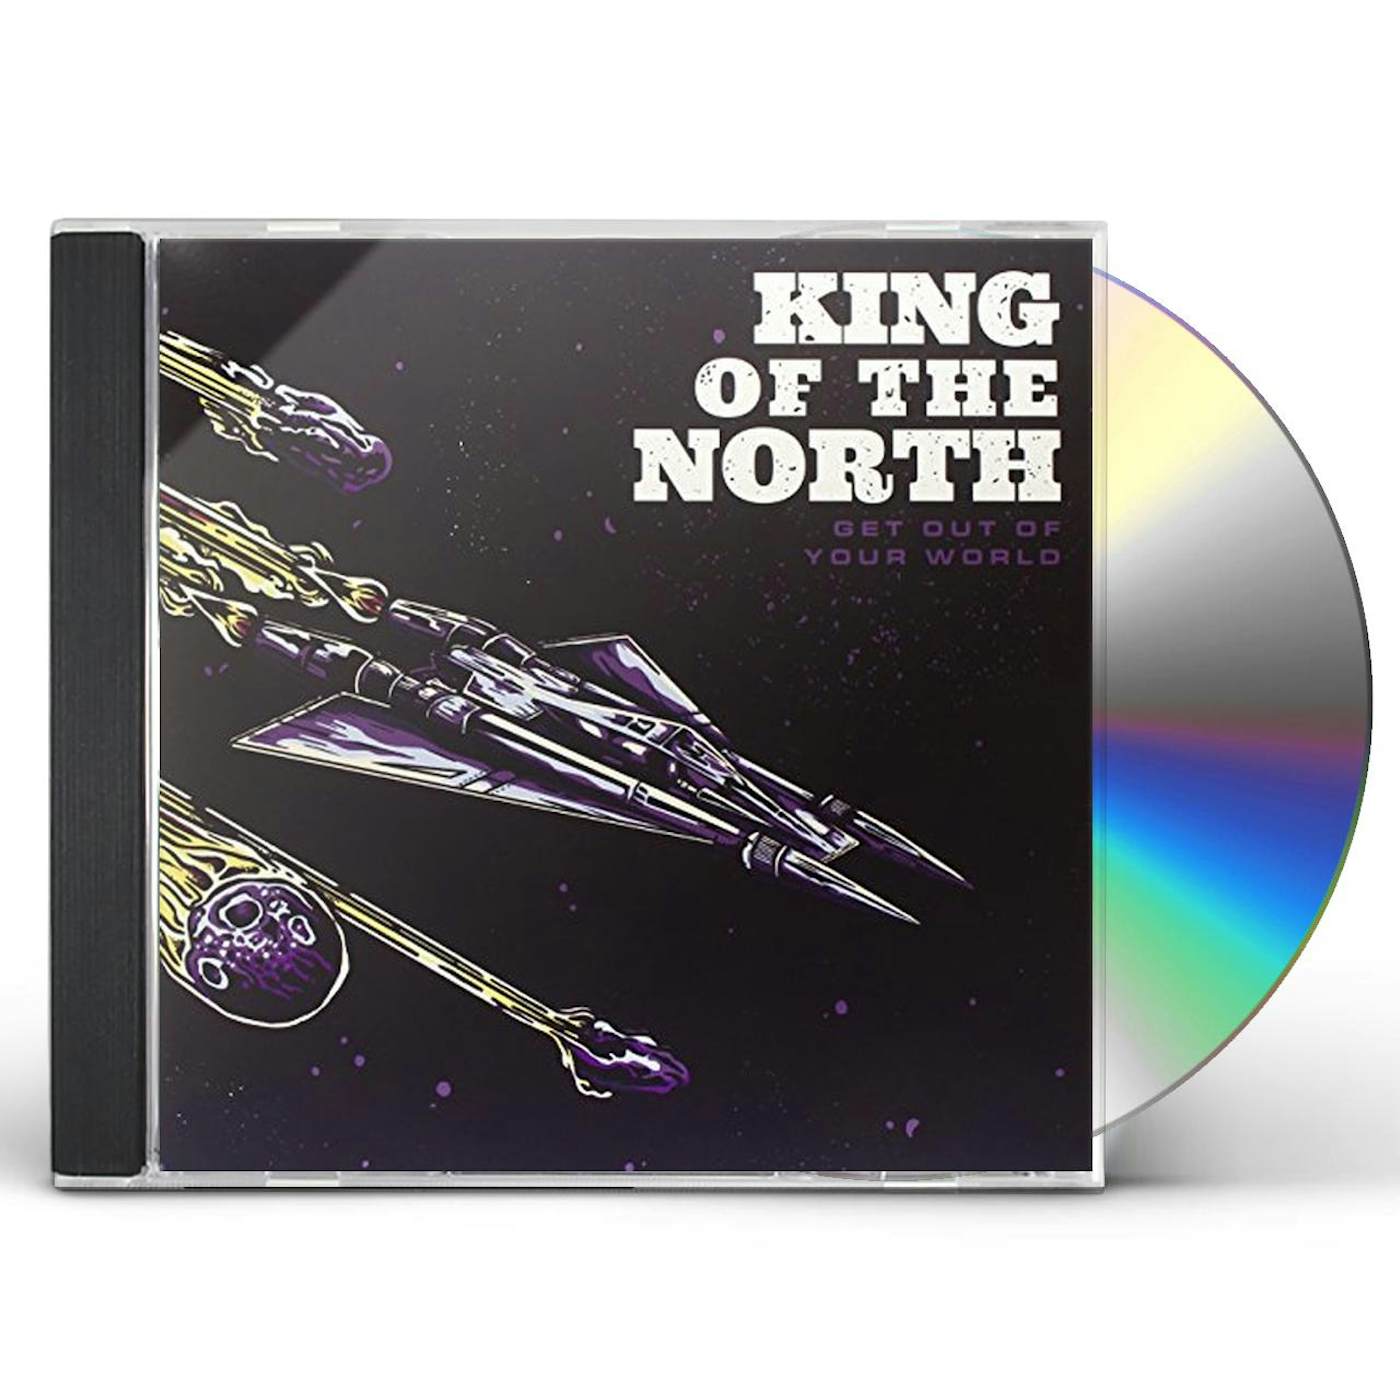 King Of The North GET OUT OF YOUR WORLD CD